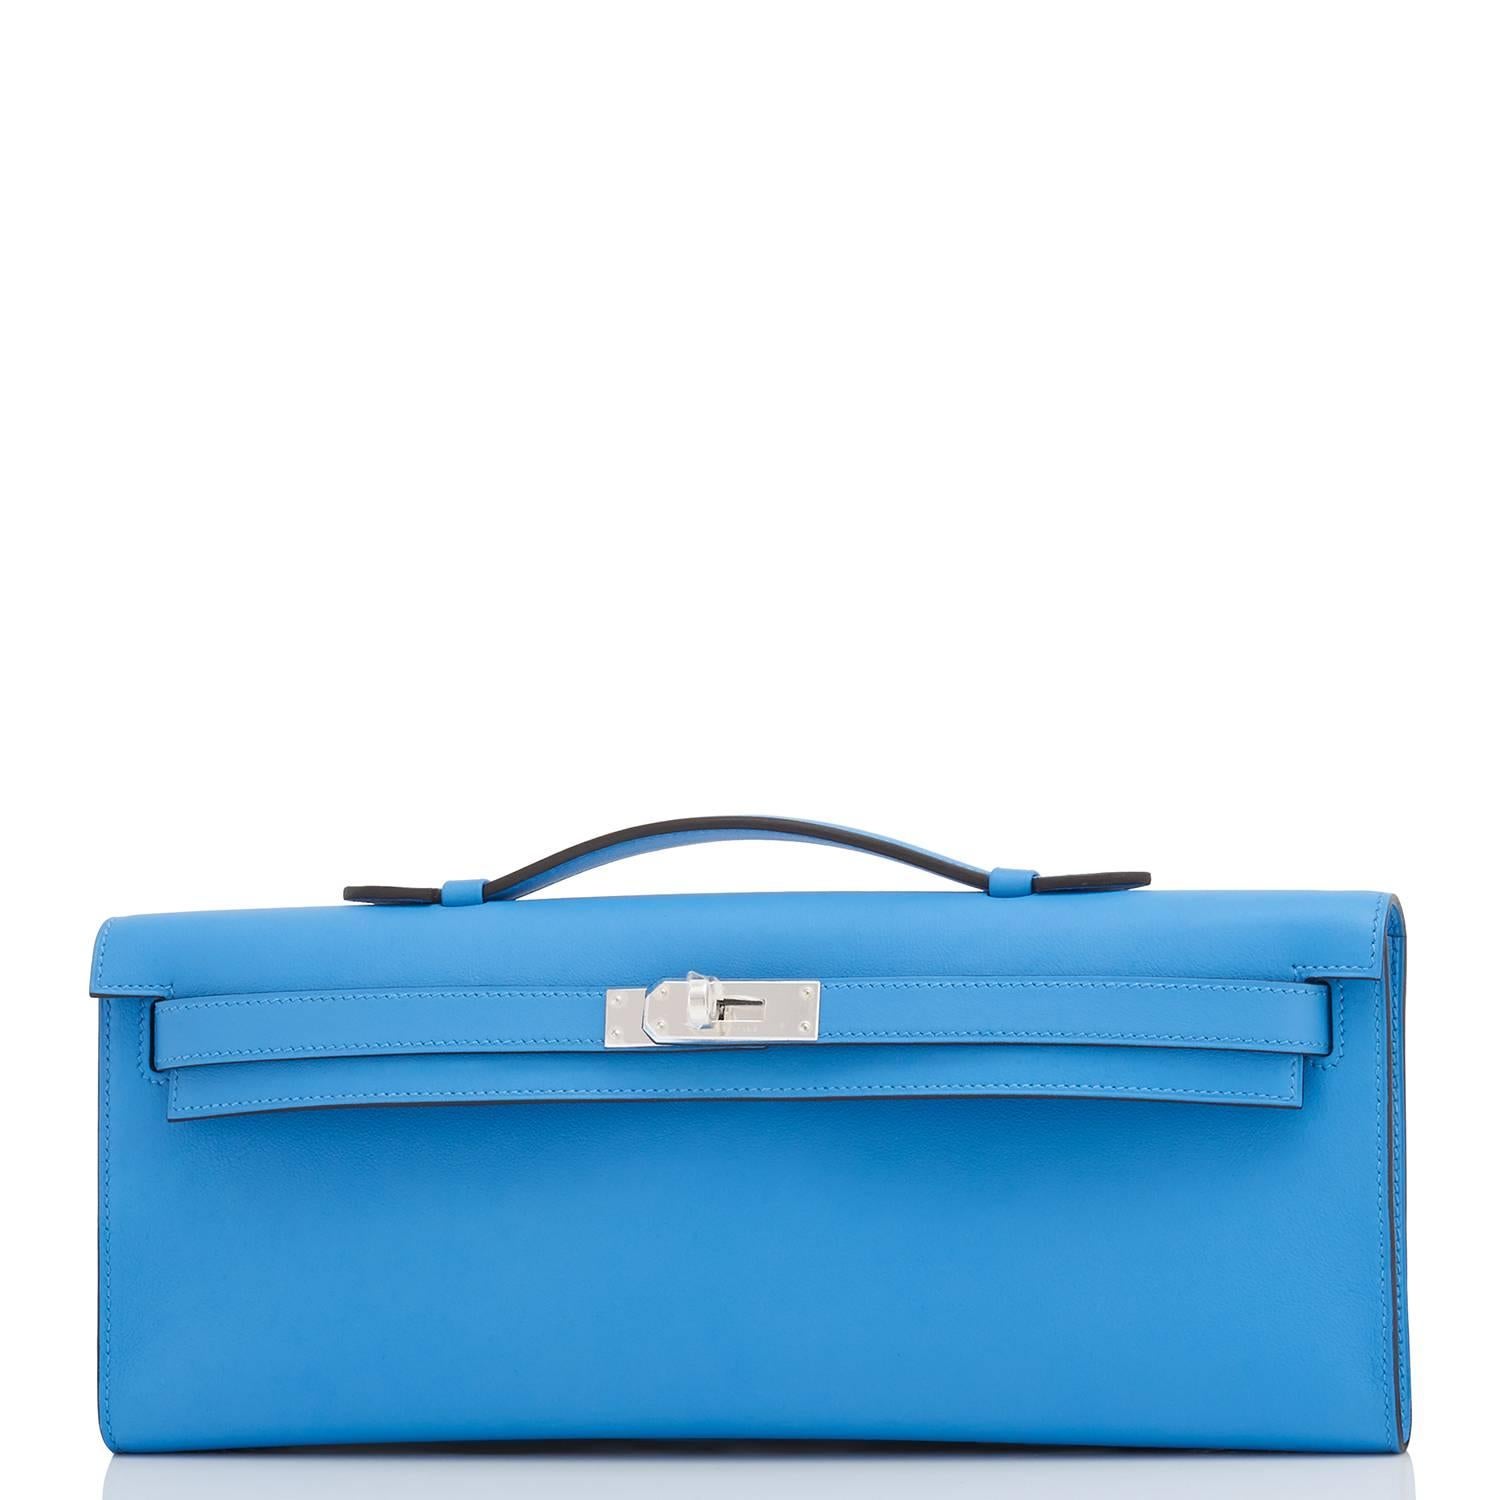 Hermes Blue Paradise Kelly Cut Pochette Clutch Swift Palladium Hardware
Brand New in Box.  Store fresh. Pristine condition.
Perfect gift! Comes with Hermes protective felt, sleeper, box and ribbon.
Blue Paradise is one of the most gorgeous blues